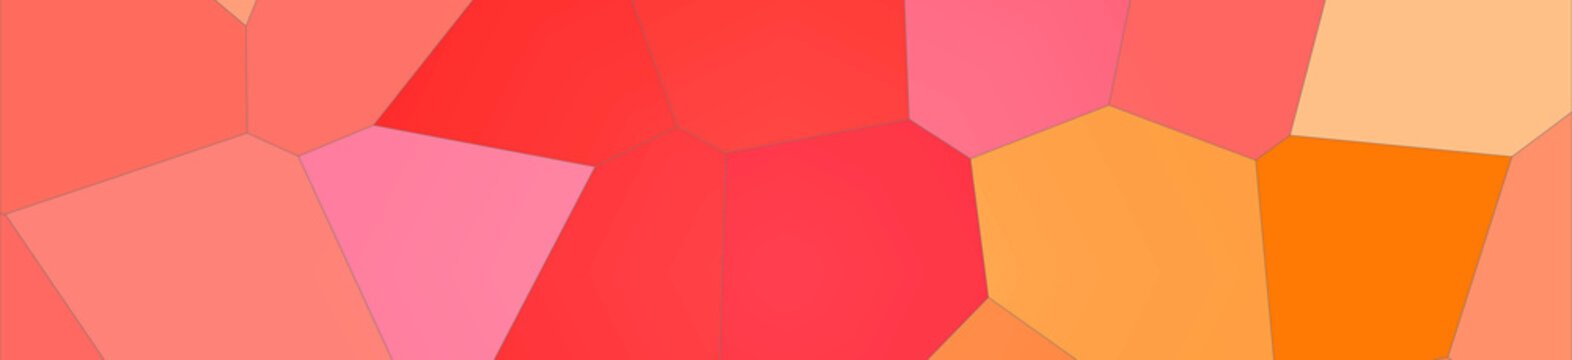 Orange, red and green bright Giant Hexagon in banner shape background illustration.